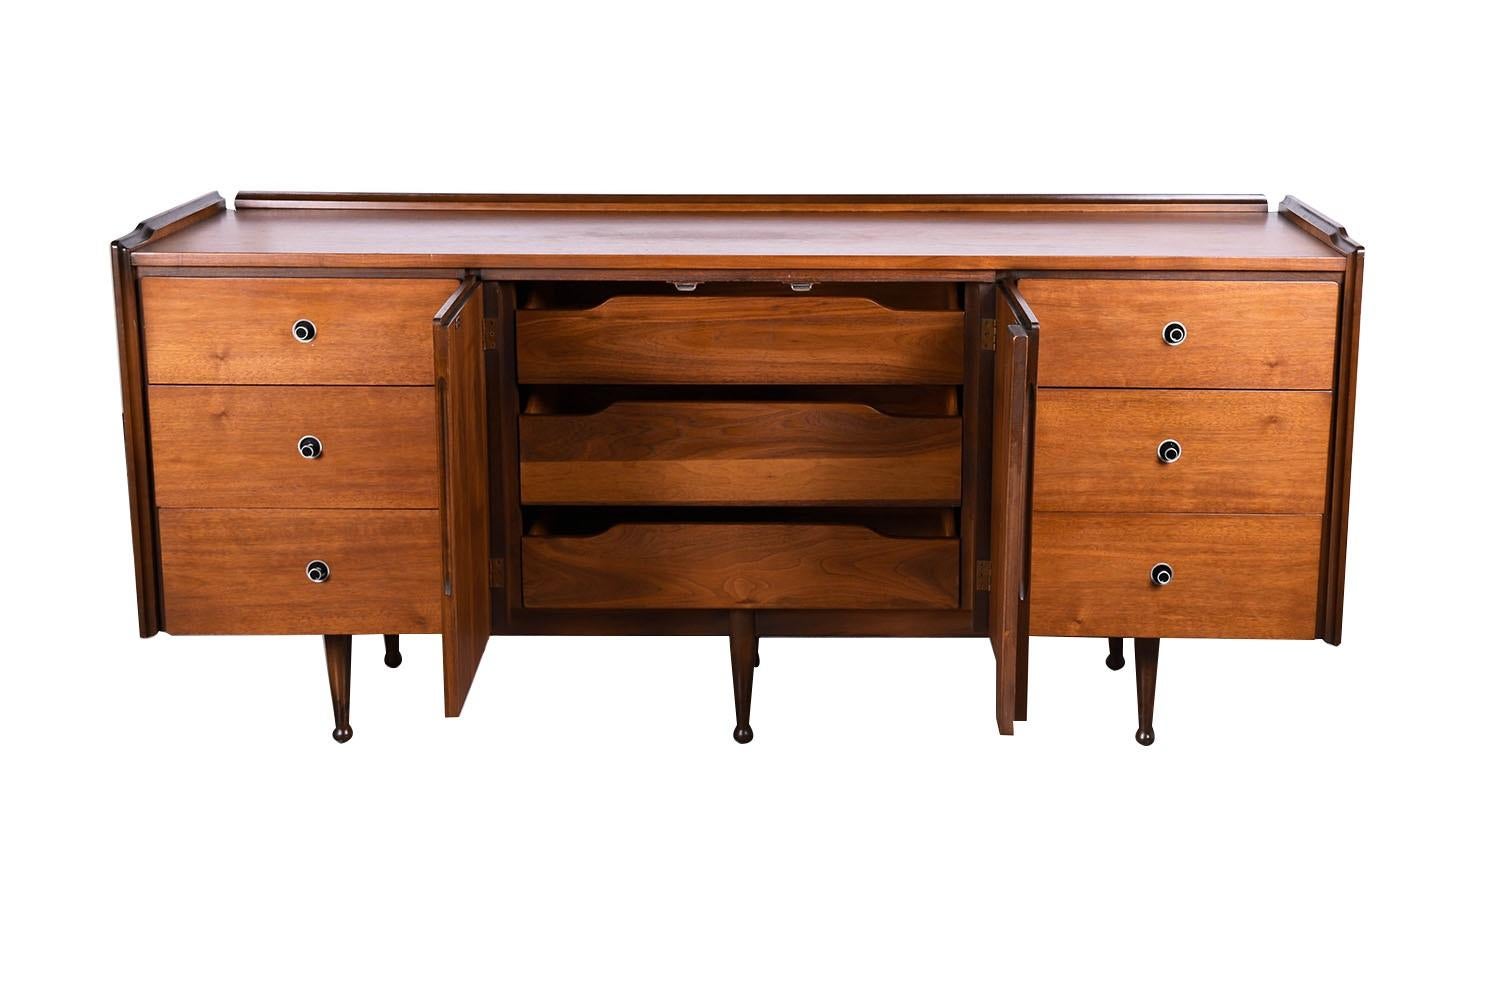 Stunning walnut Mid-Century Modern credenza, dresser for Mainline by Hooker Furniture Company circa 1960’s. This unit features a rectangle top with sculpted raised backsplash and side edges above a whopping 9 drawers. Three deep spacious drawers